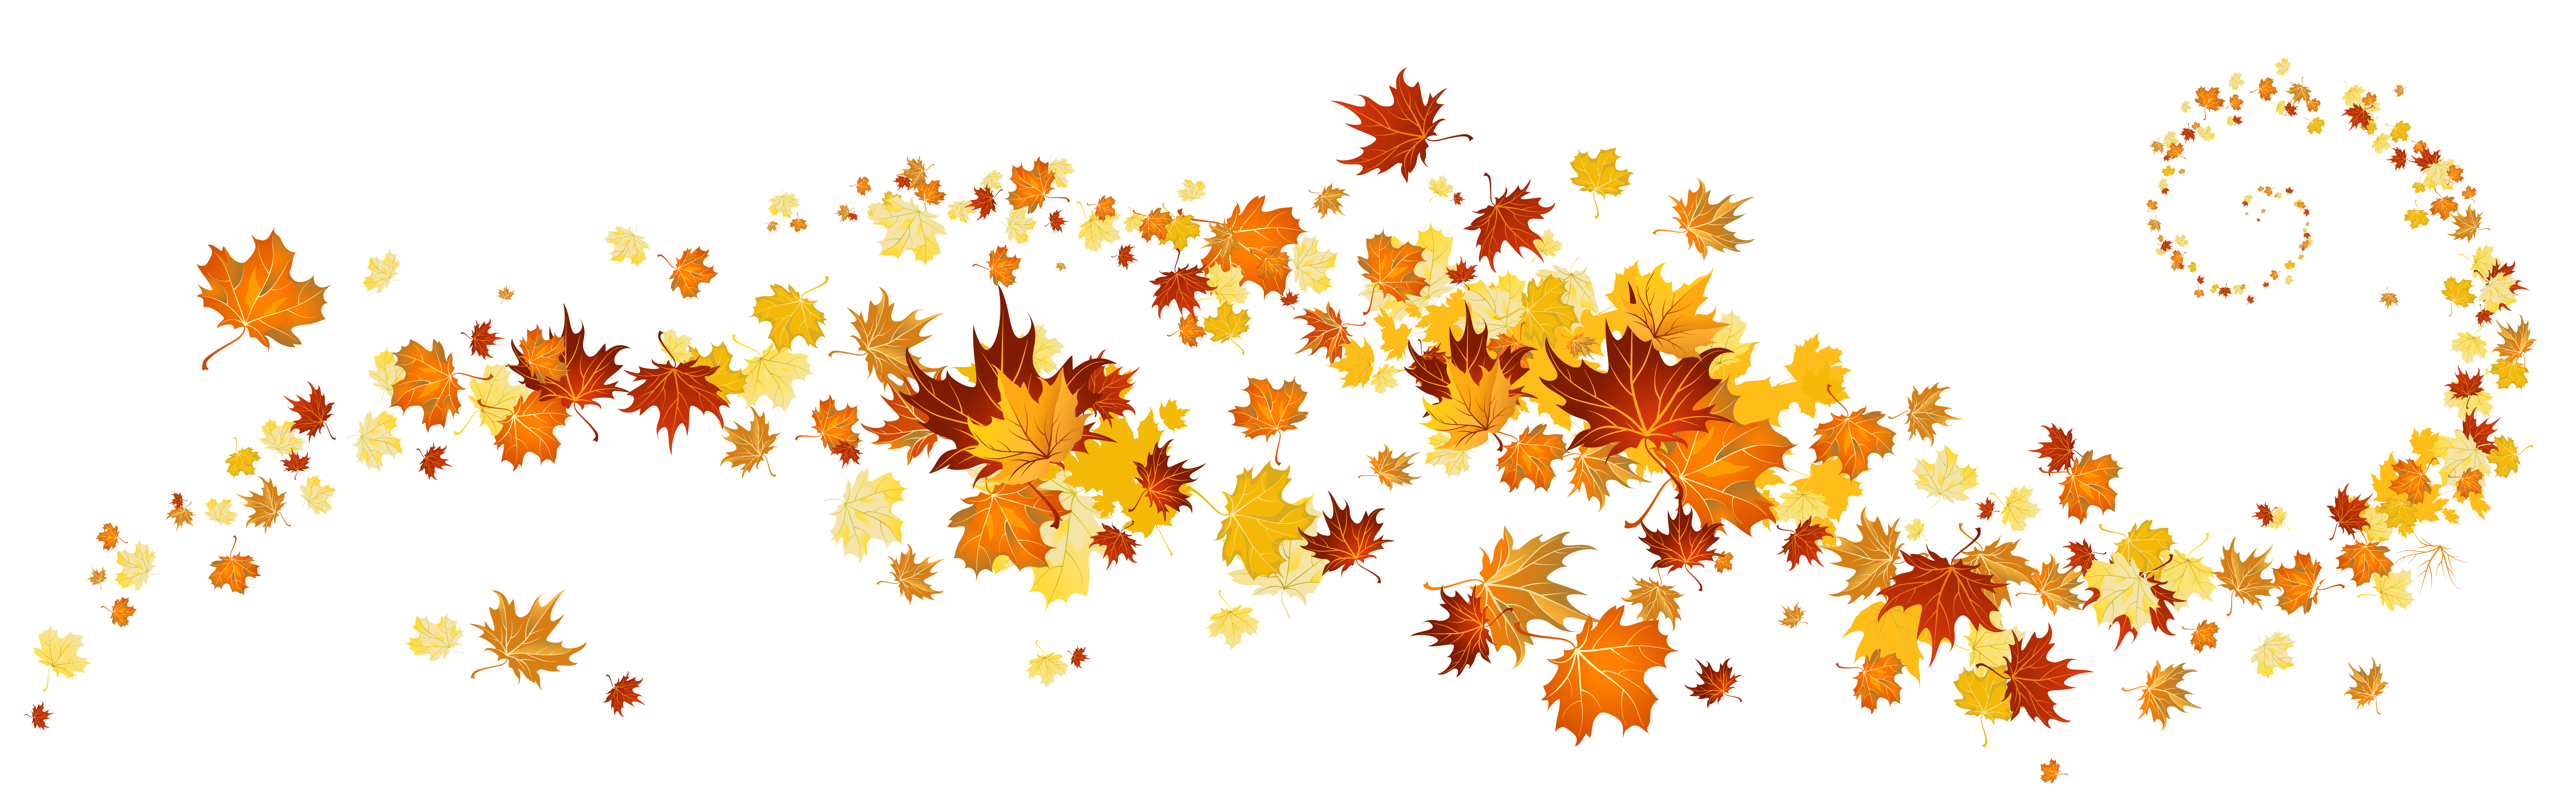 free clipart of fall flowers - photo #39